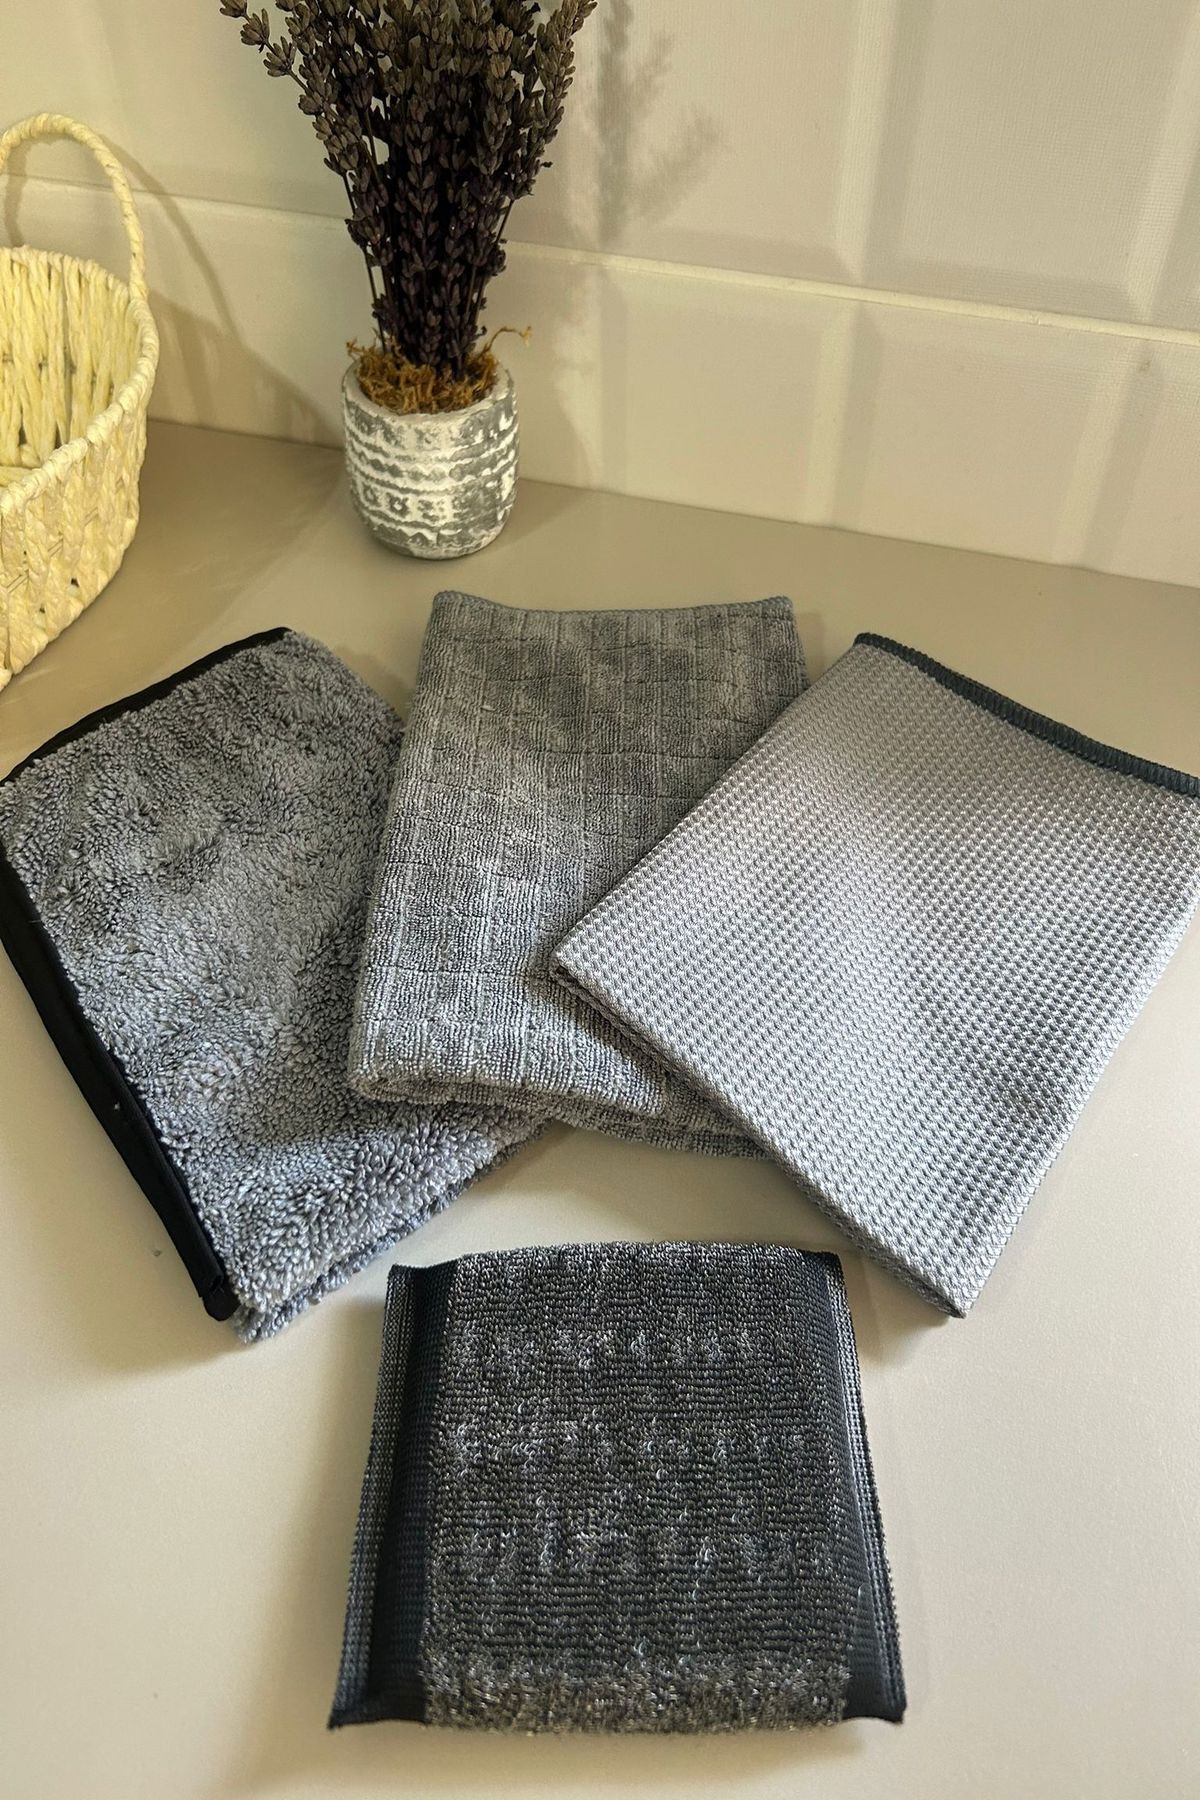 z'imher (4 Pieces) Microfiber Gray Cleaning Set Kitchen Cloth +